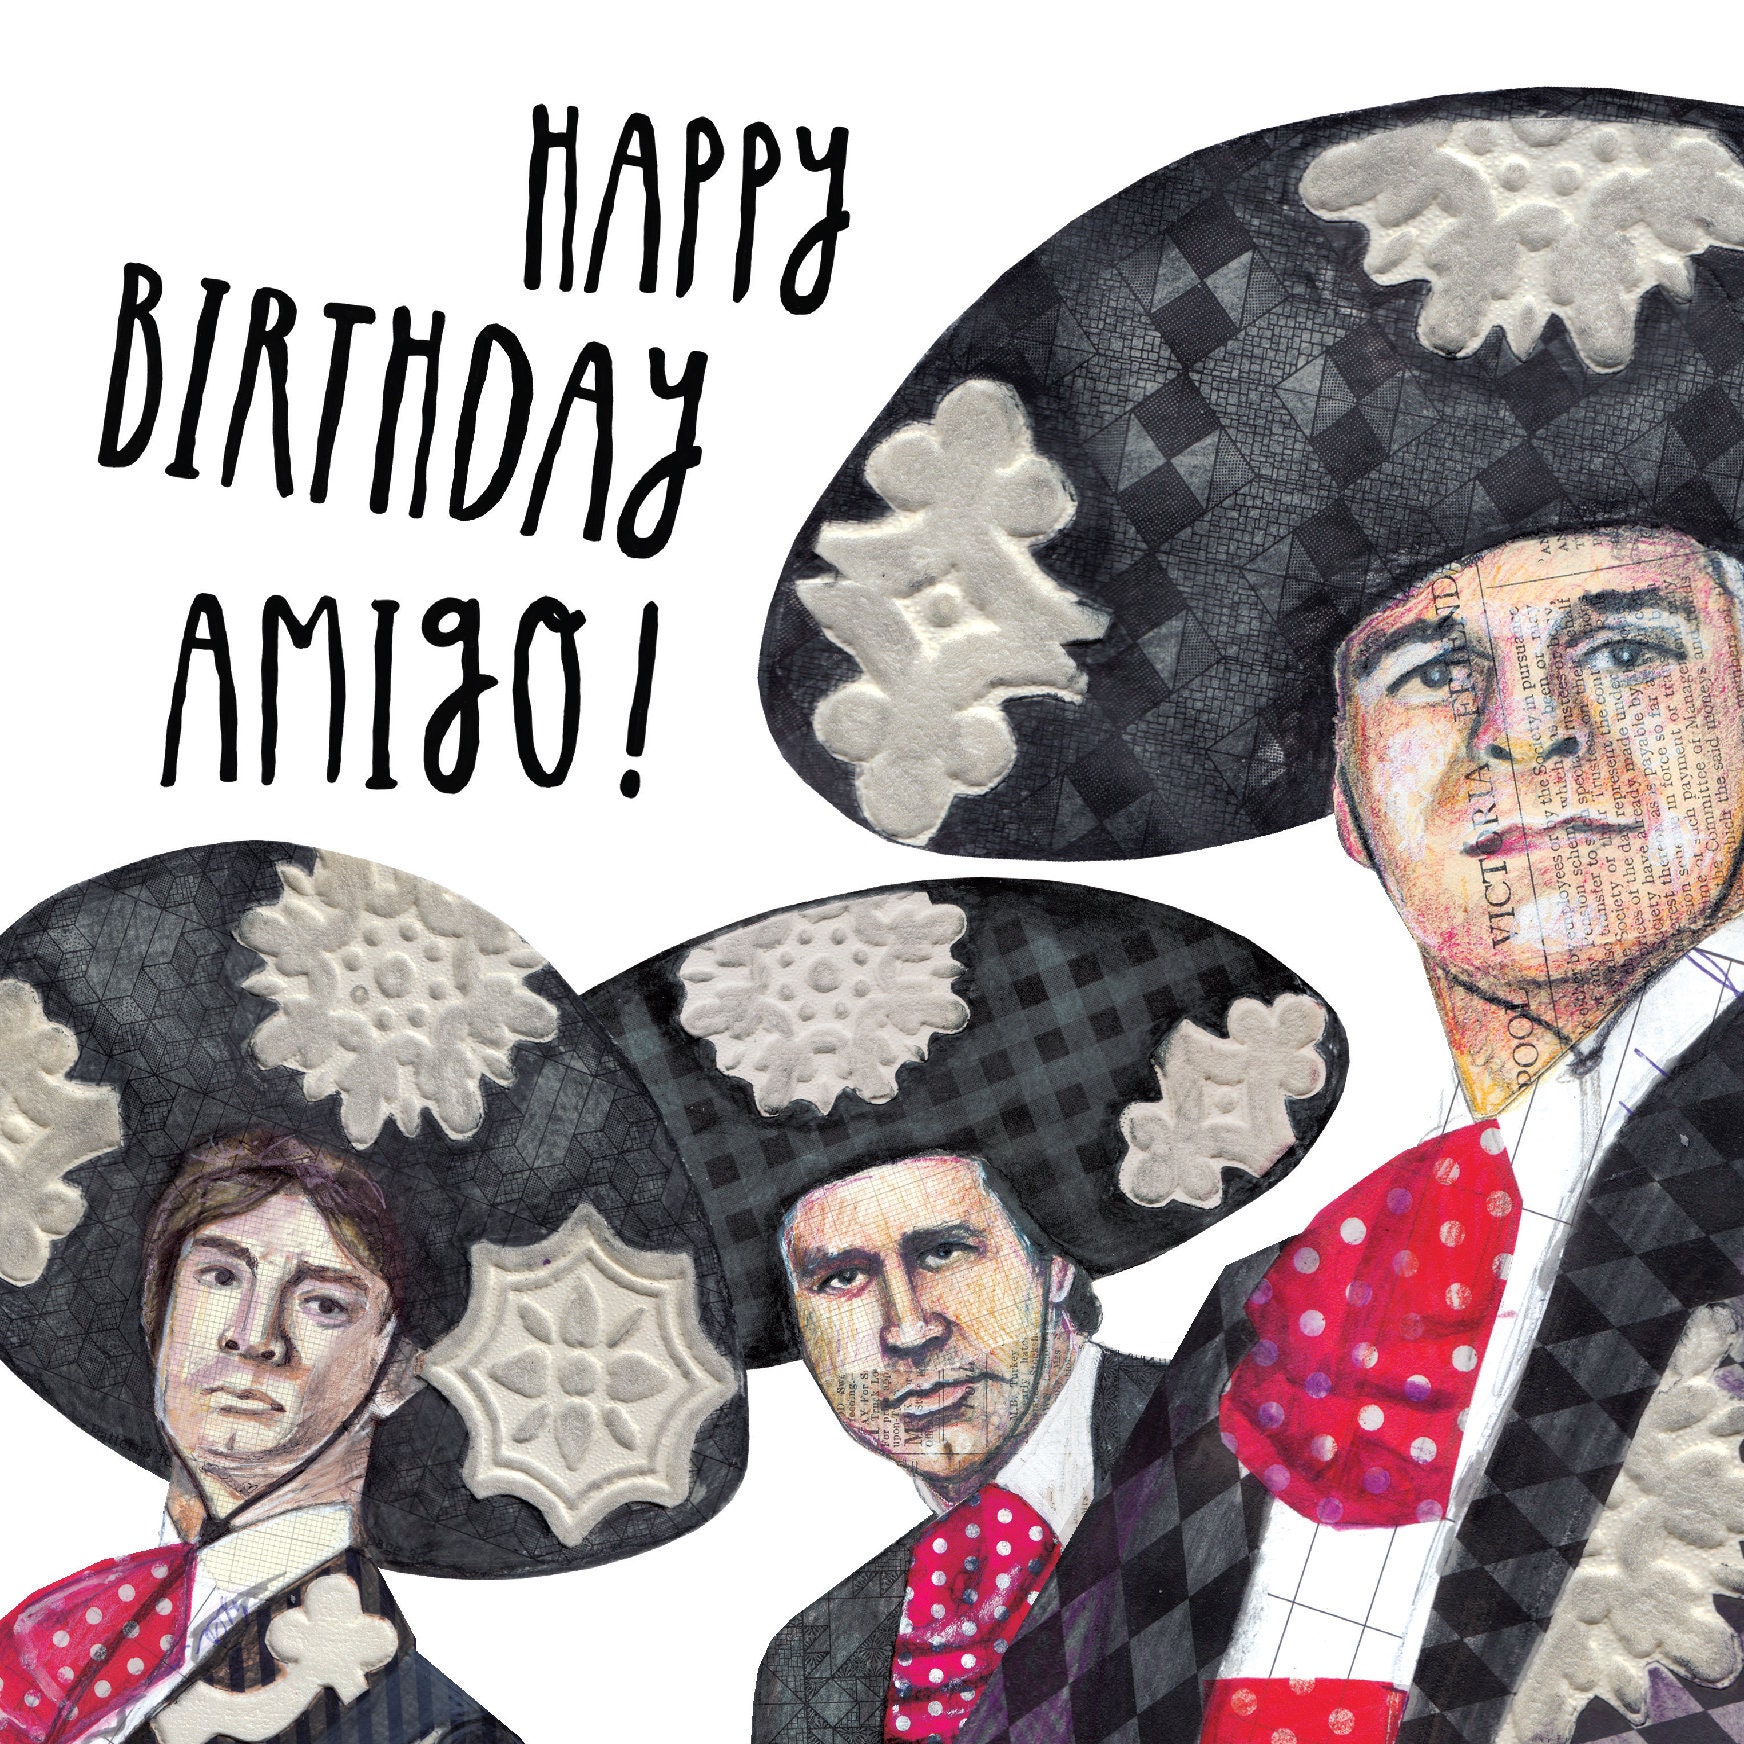 CHEVY CHASE , STEVE MARTIN and MARTIN SHORT in THREE AMIGOS -1986-. Greeting  Card by Album